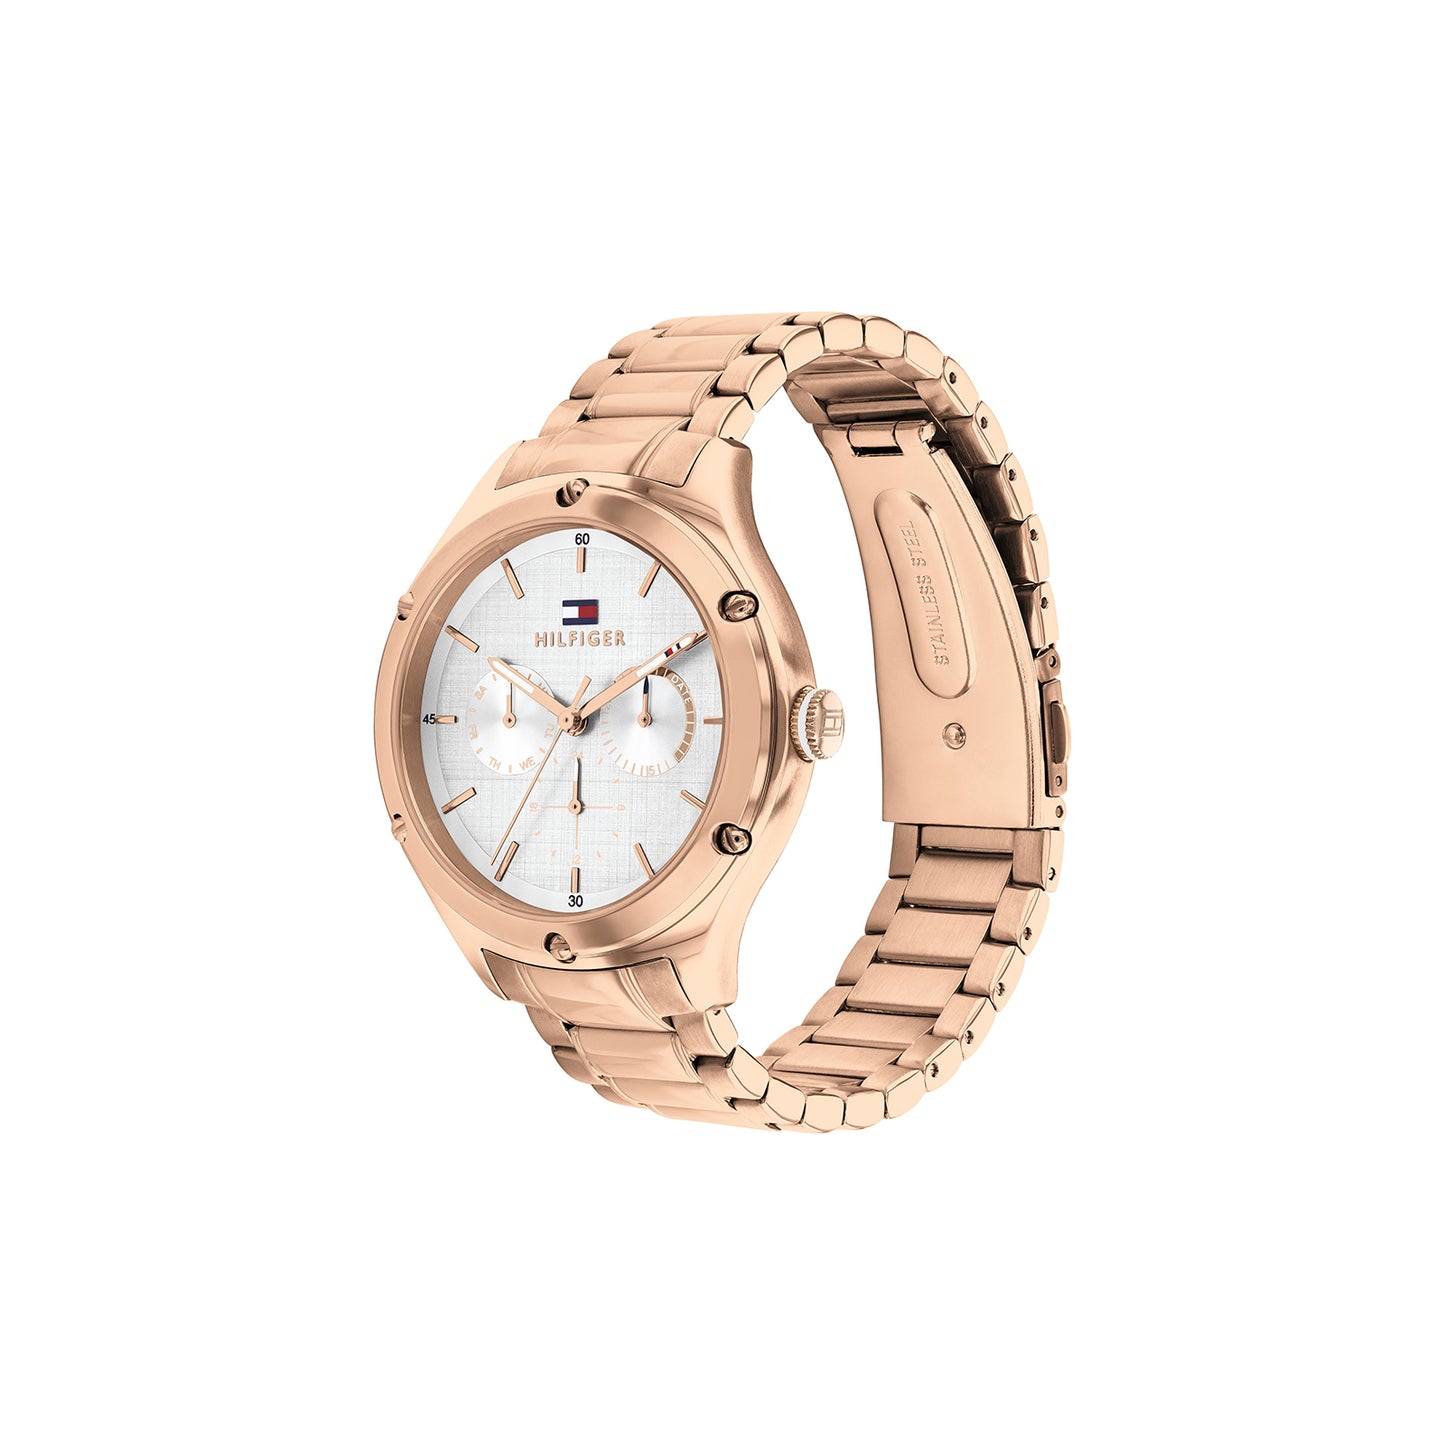 Tommy Hilfiger 1782682 Women's Ionic Rose Gold Plated Steel Watch